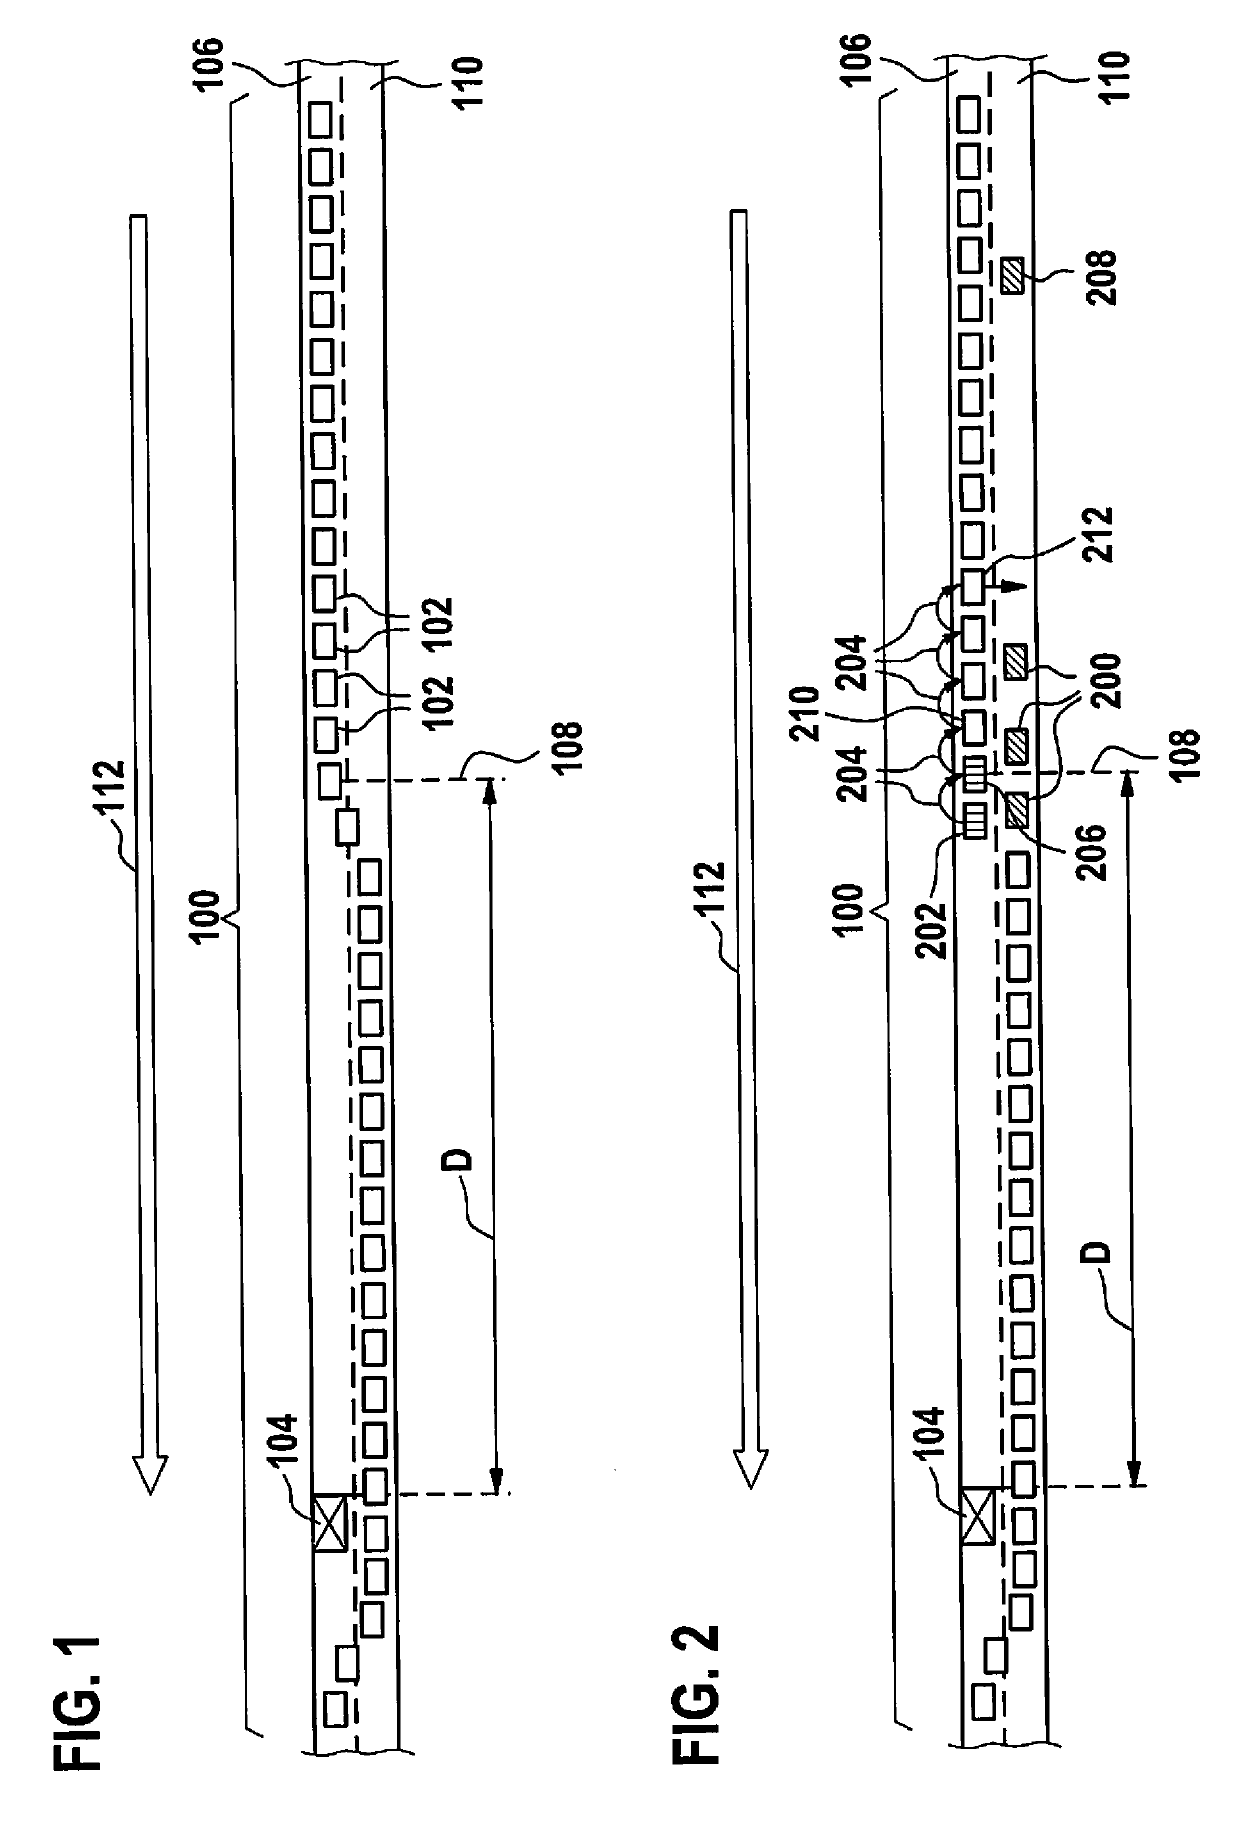 Method for transmitting pieces of information between vehicles of a vehicle platoon and method for processing an assistance request output by a first vehicle of a vehicle platoon during a lane change by at least one second vehicle of the vehicle platoon